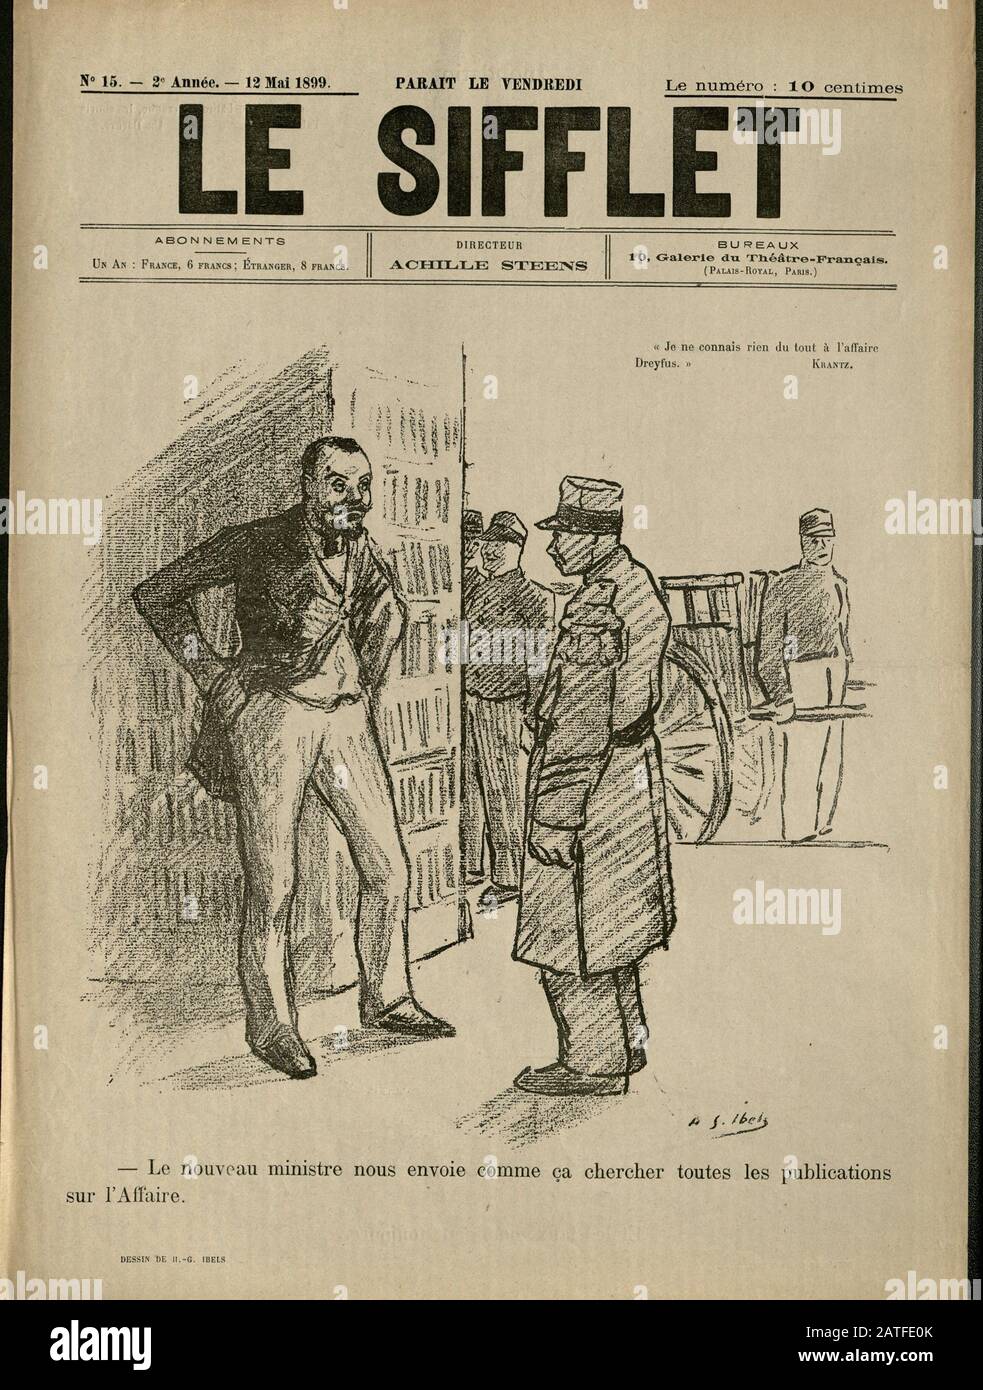 The Dreyfus Affair 1894-1906 - Le Sifflet, May 12, 1899 -  French illustrated newspaper Stock Photo